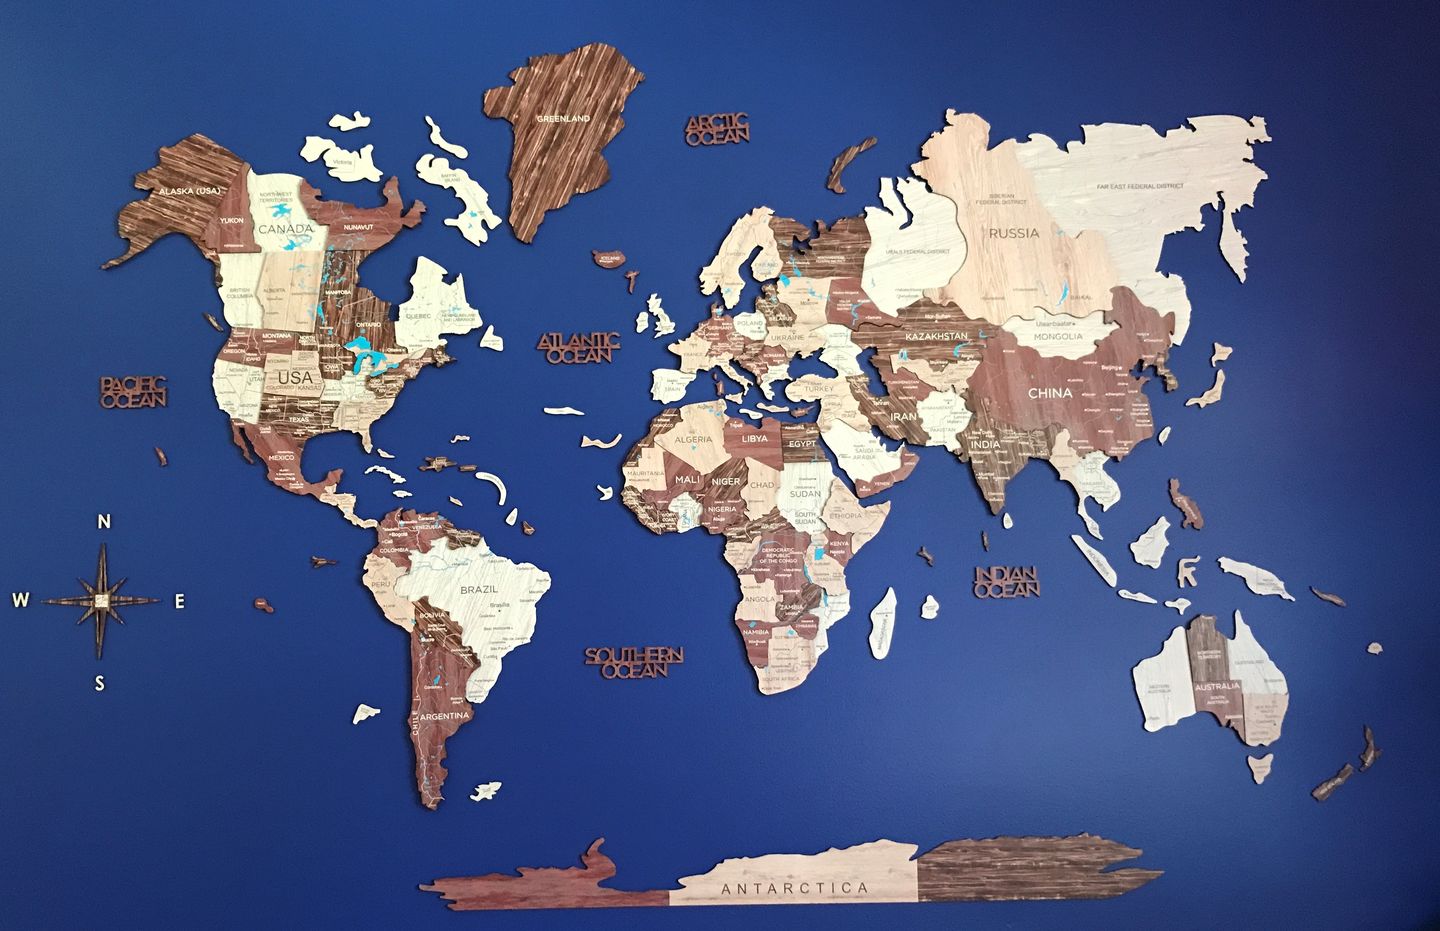 3D Wooden World Map in Cappuccino Color on a Blue Wall